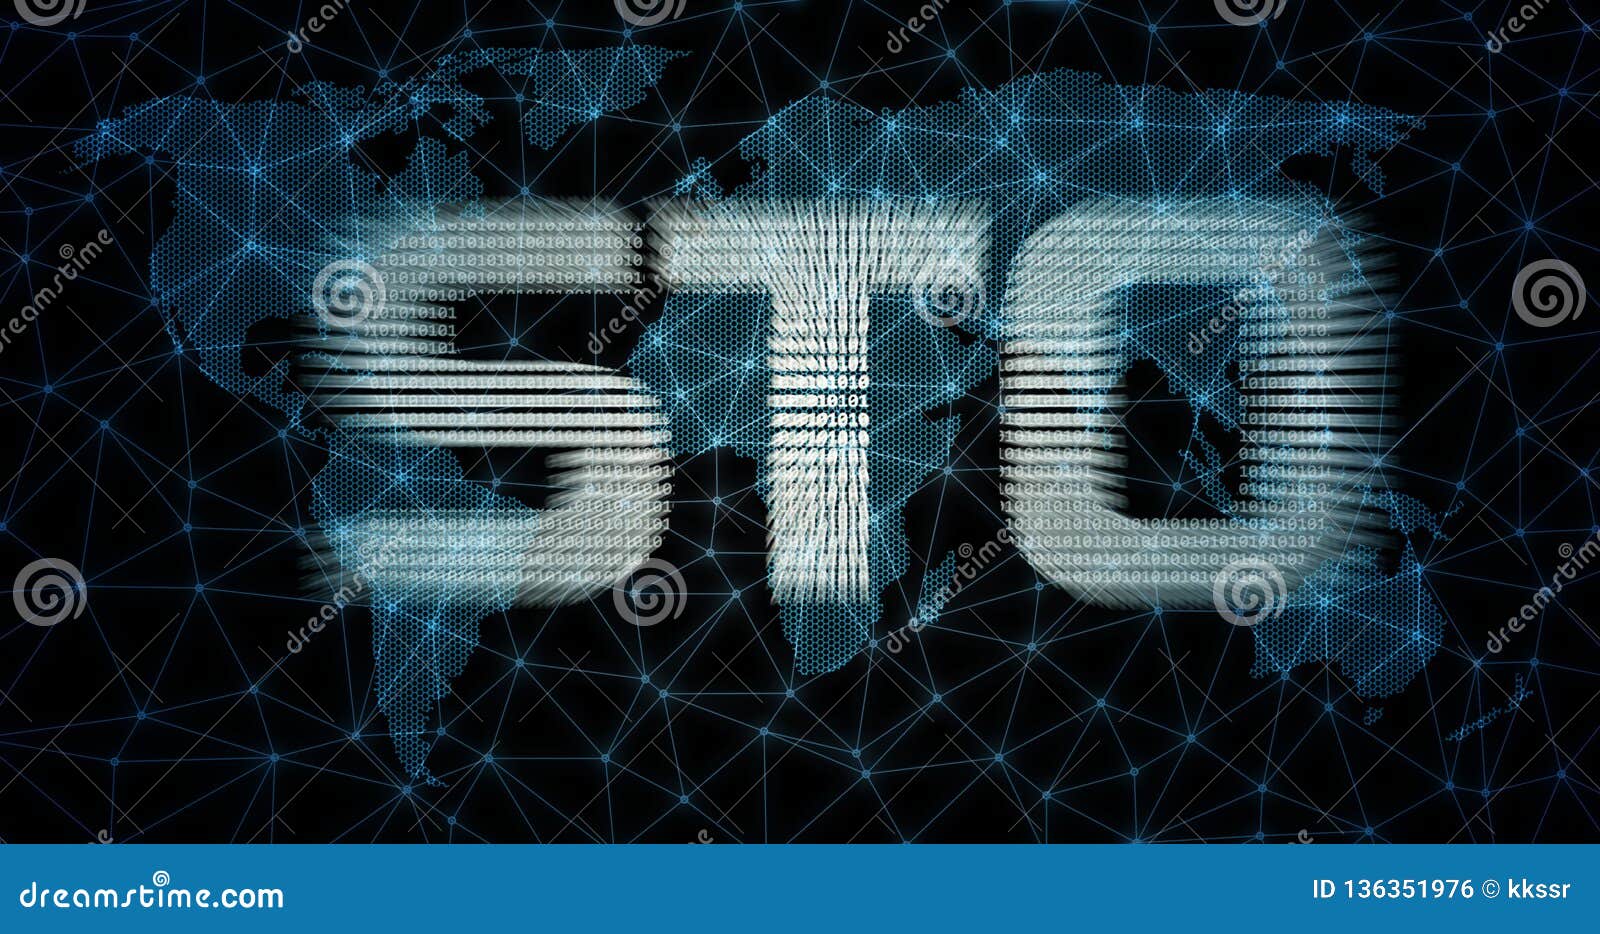 security token offering sto text written in binary format on abstract wired network and blue global world map background.